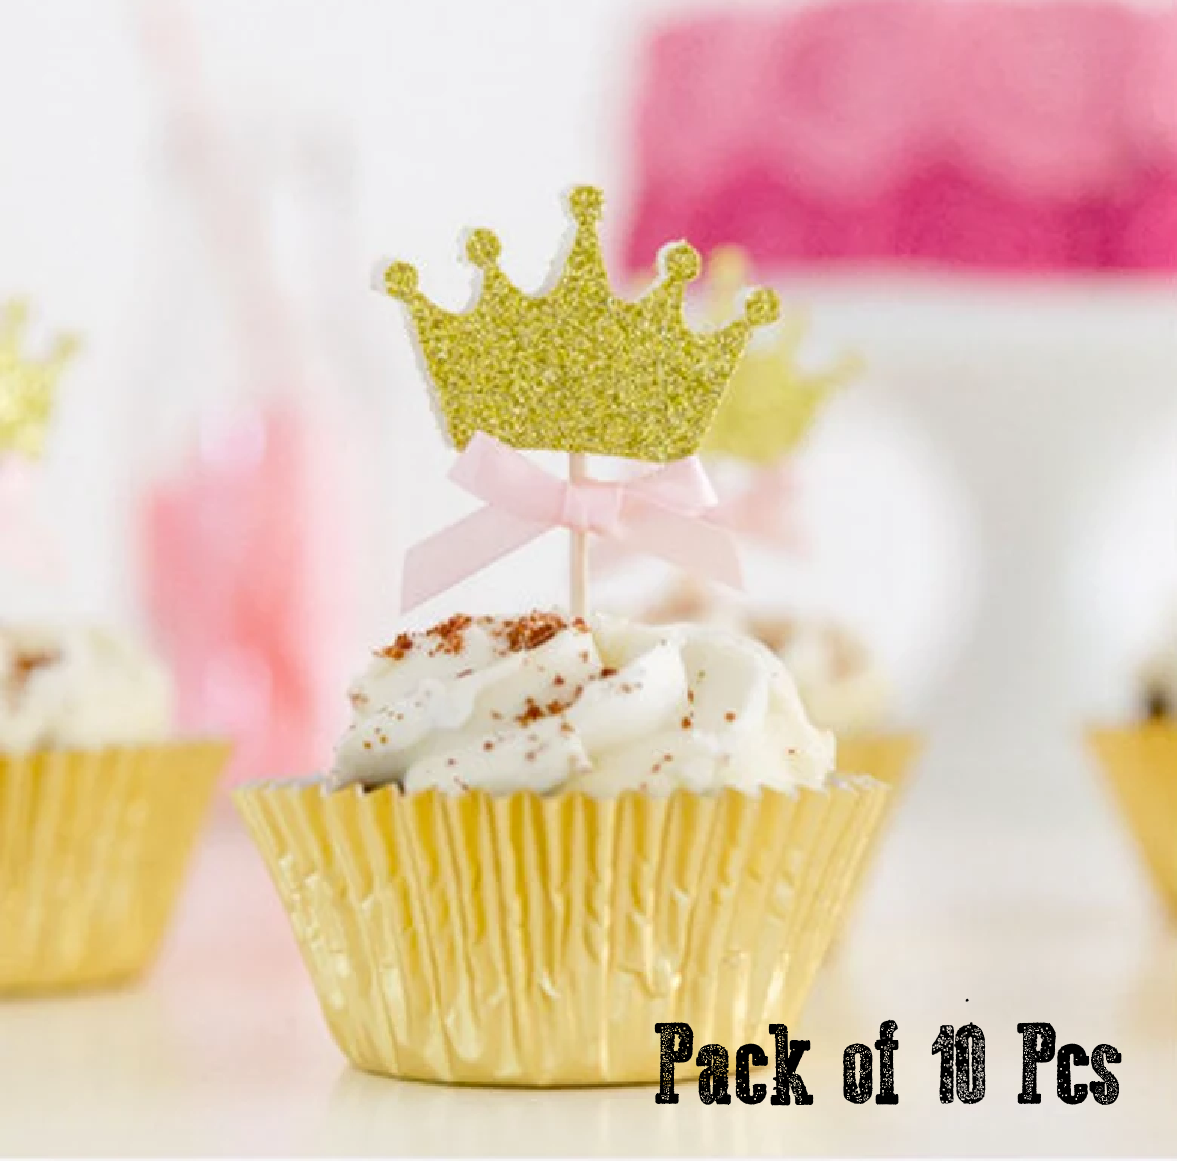 Cupcake Toppers - Gold Crown with Blue Ribbon - Set of 10